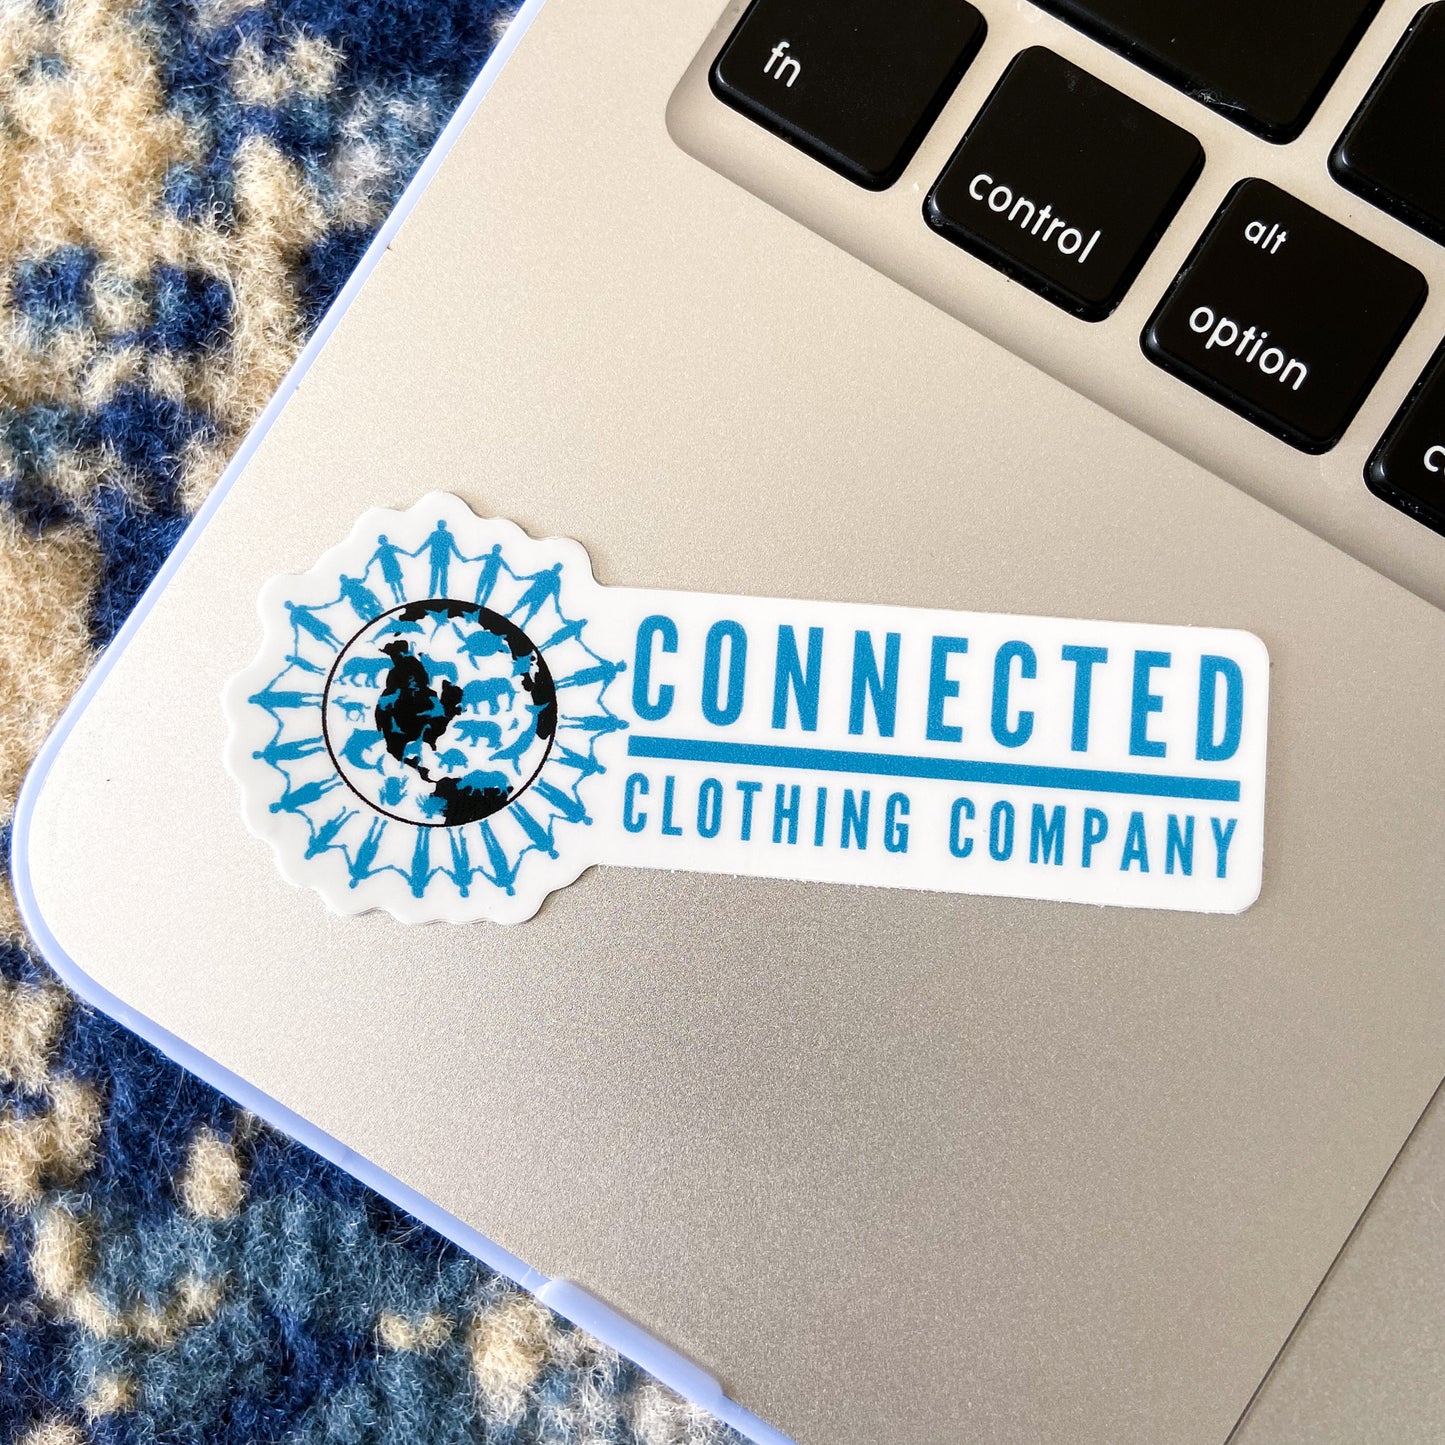 Connected Clothing Company Logo Sticker on a Macbook for size reference.